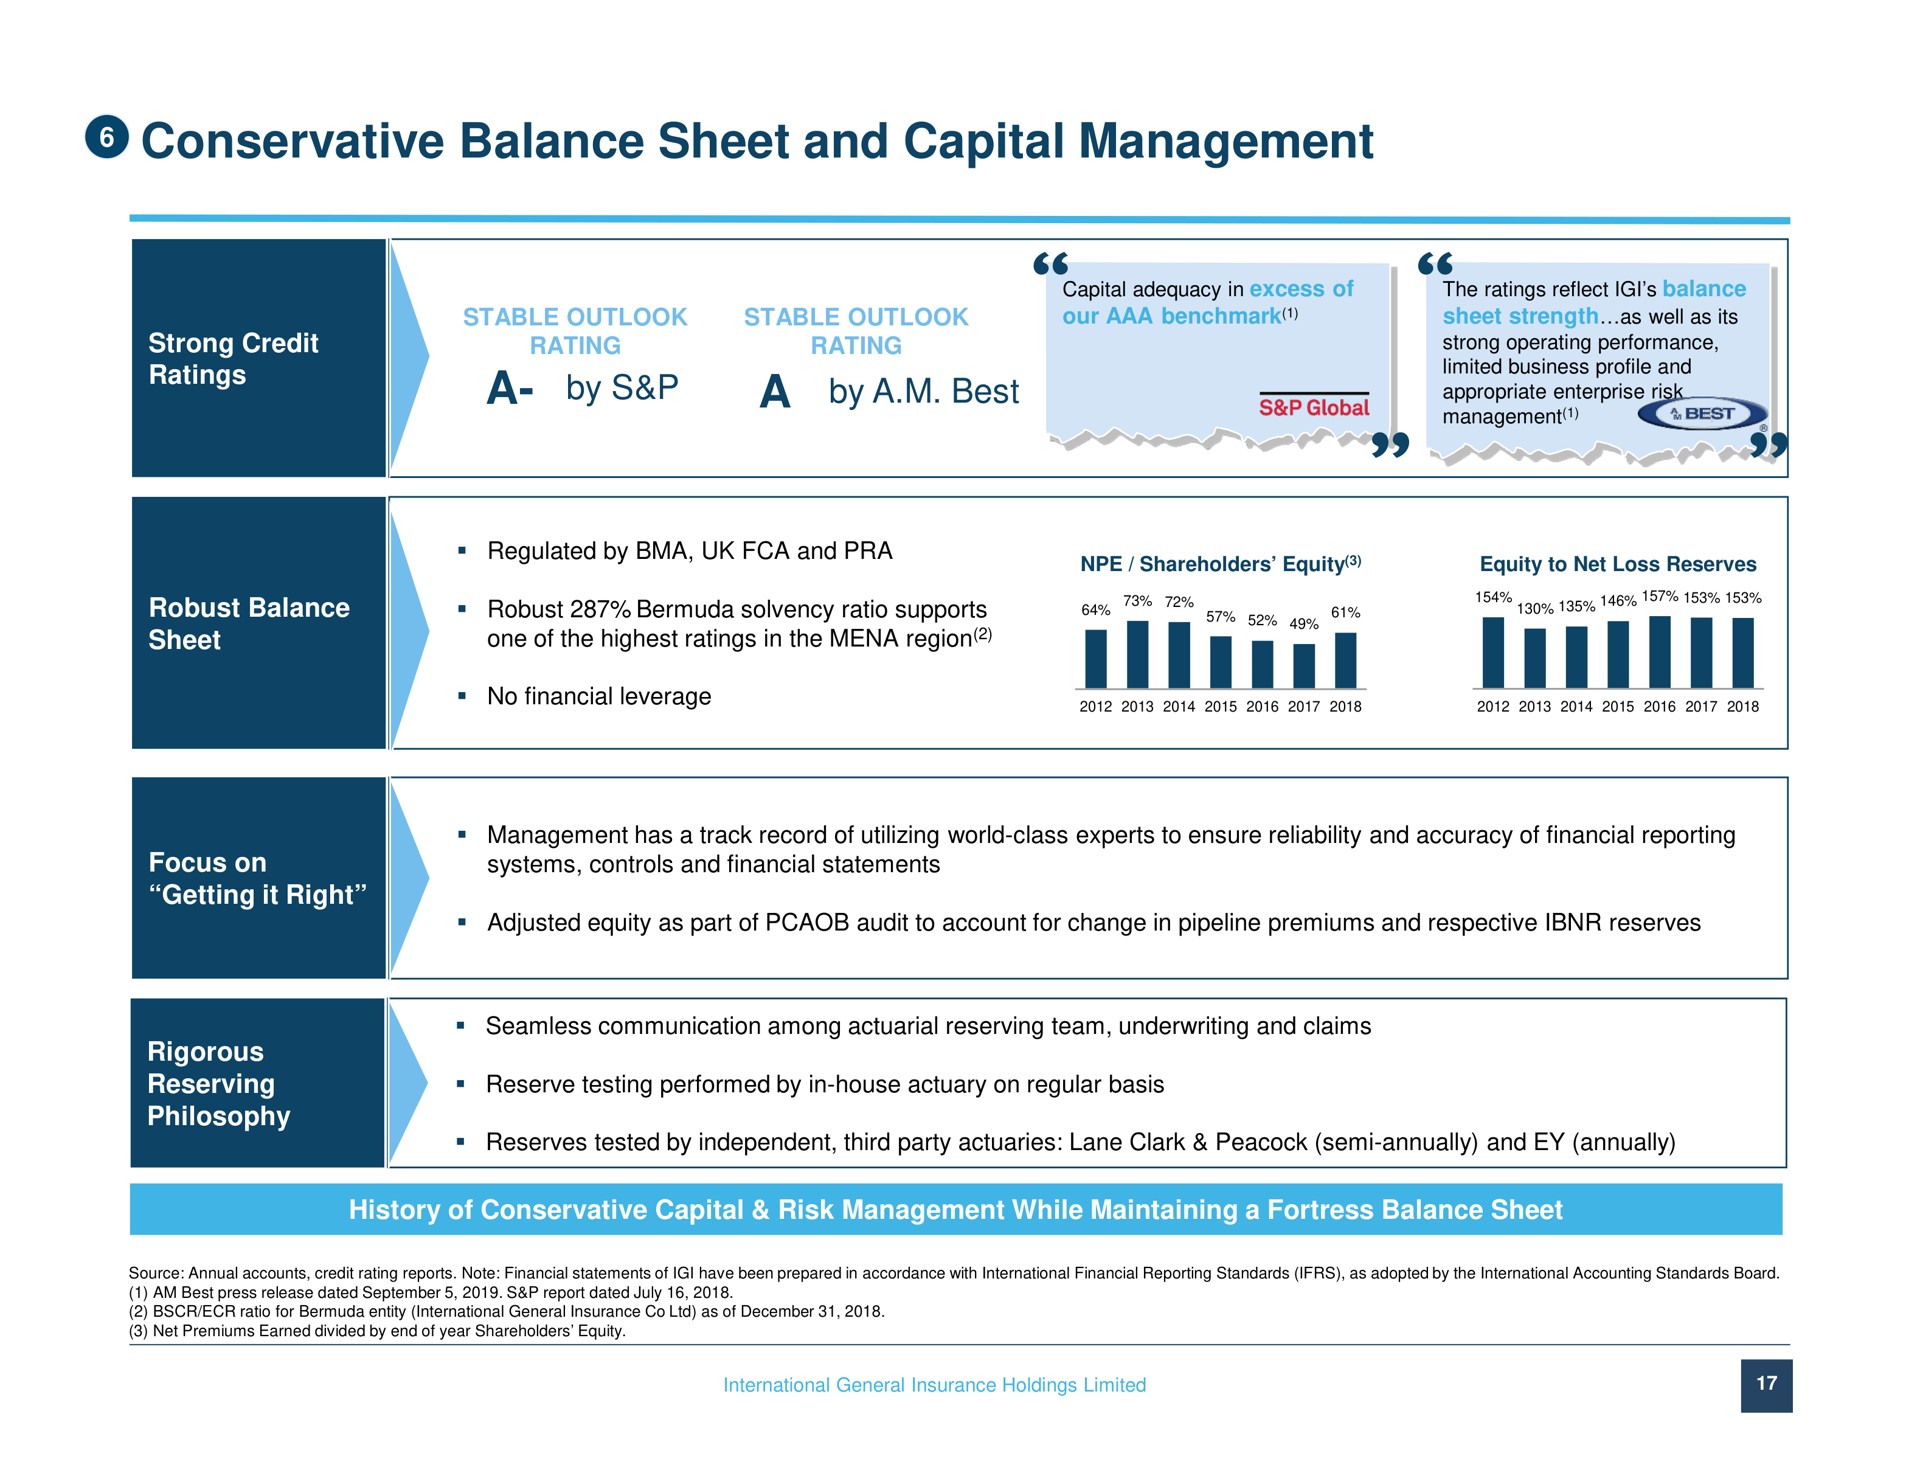 conservative balance sheet and capital management a by a by a best ratings global | IGI